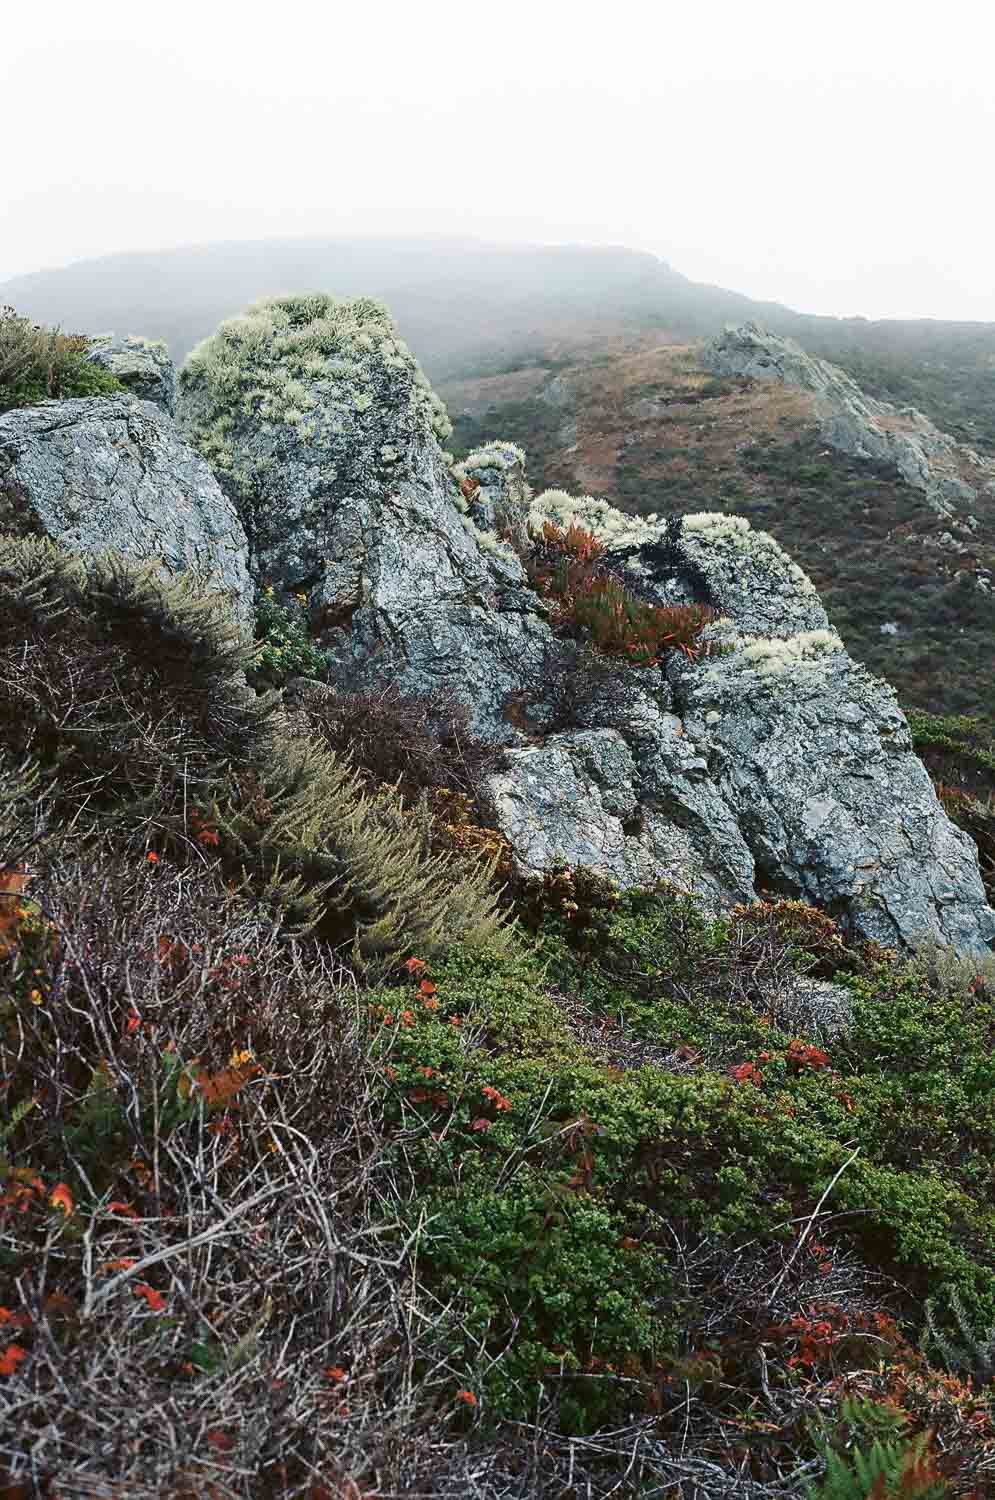 Rugged hillside with rocky outcrops and varied vegetation.